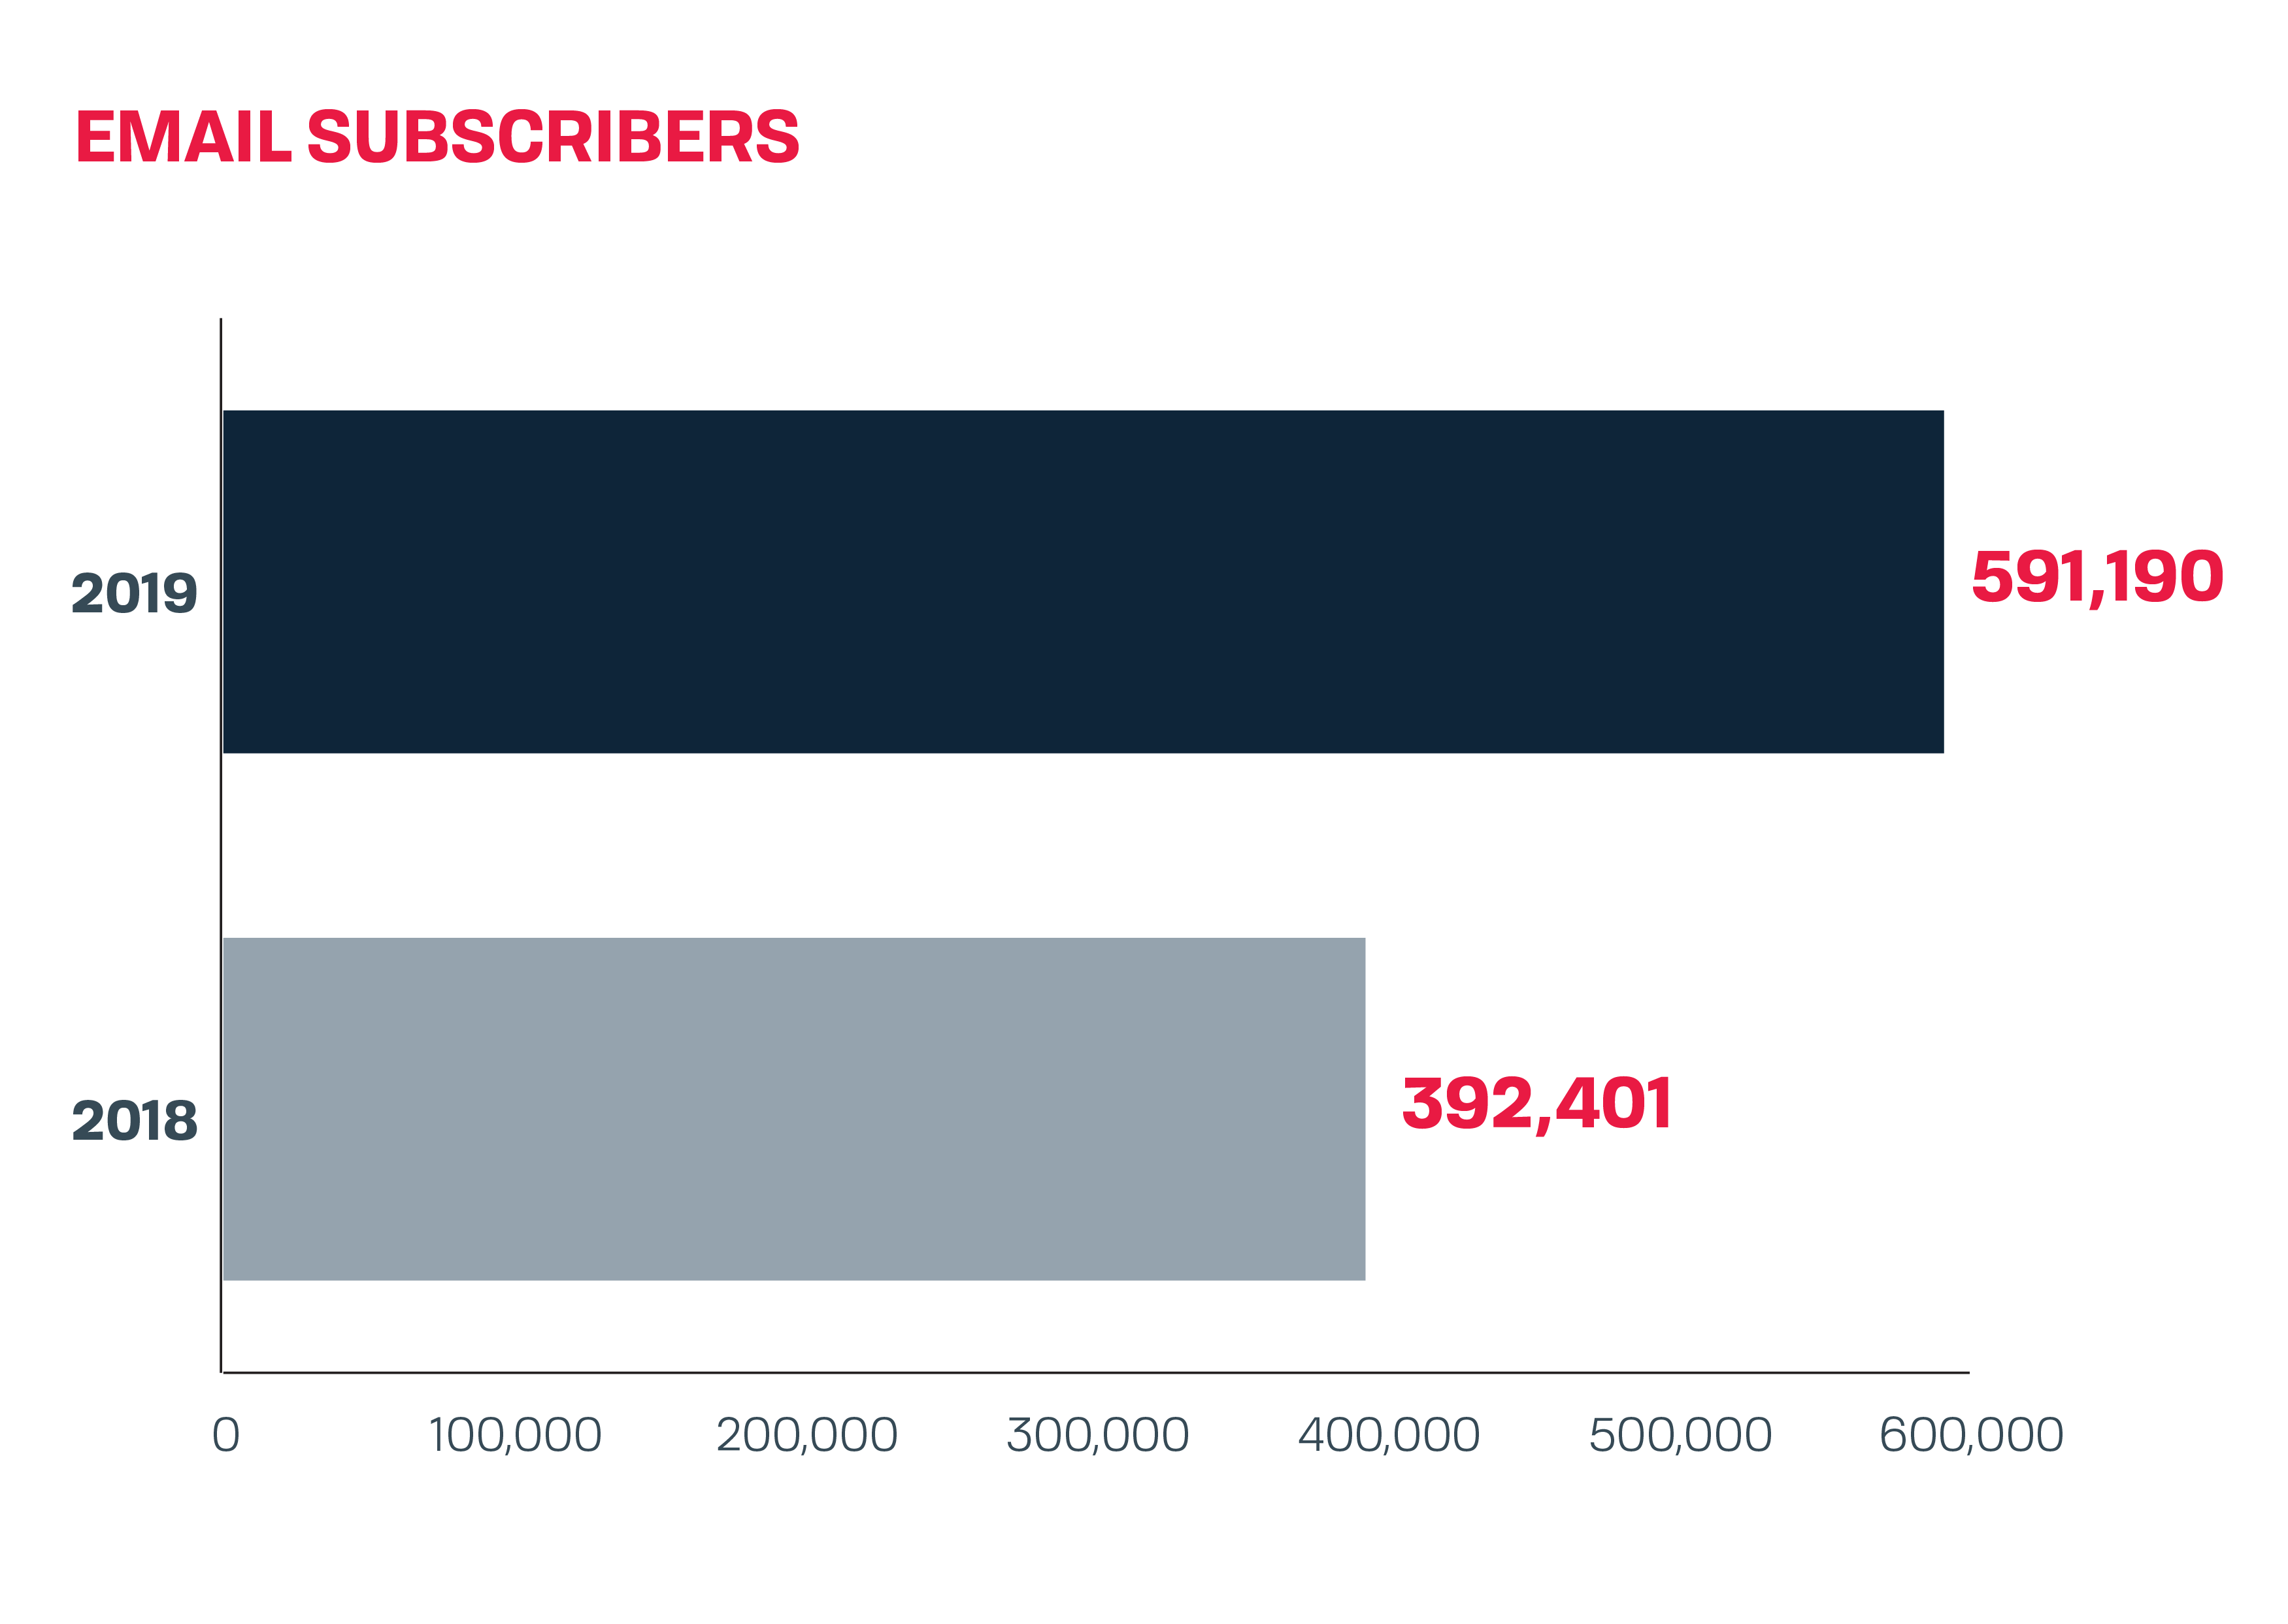 Email subscribers